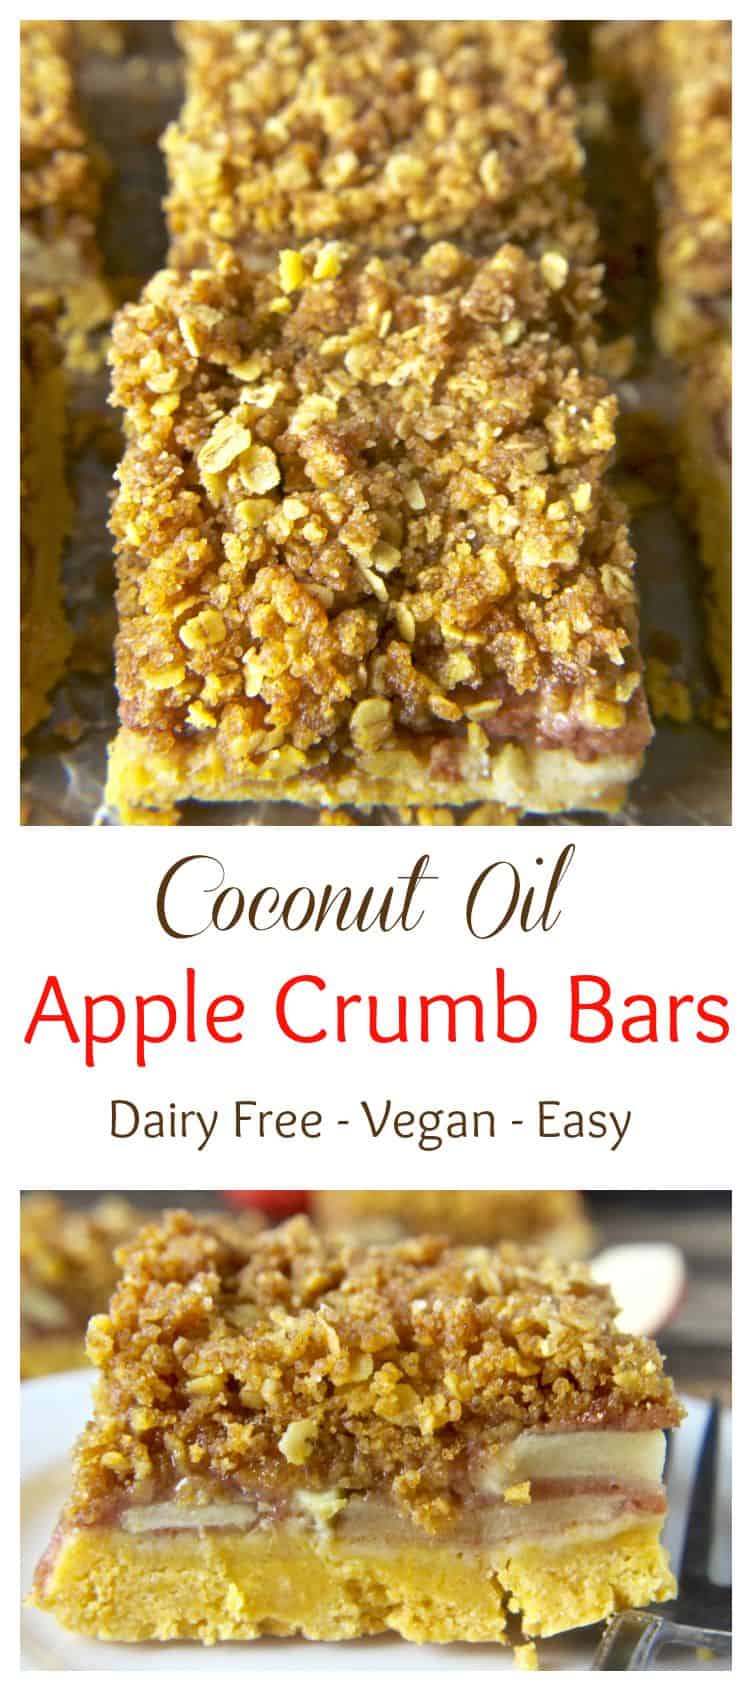 Coconut Oil Apple Crumb Bars- easy and so delicious! Vegan and dairy free!